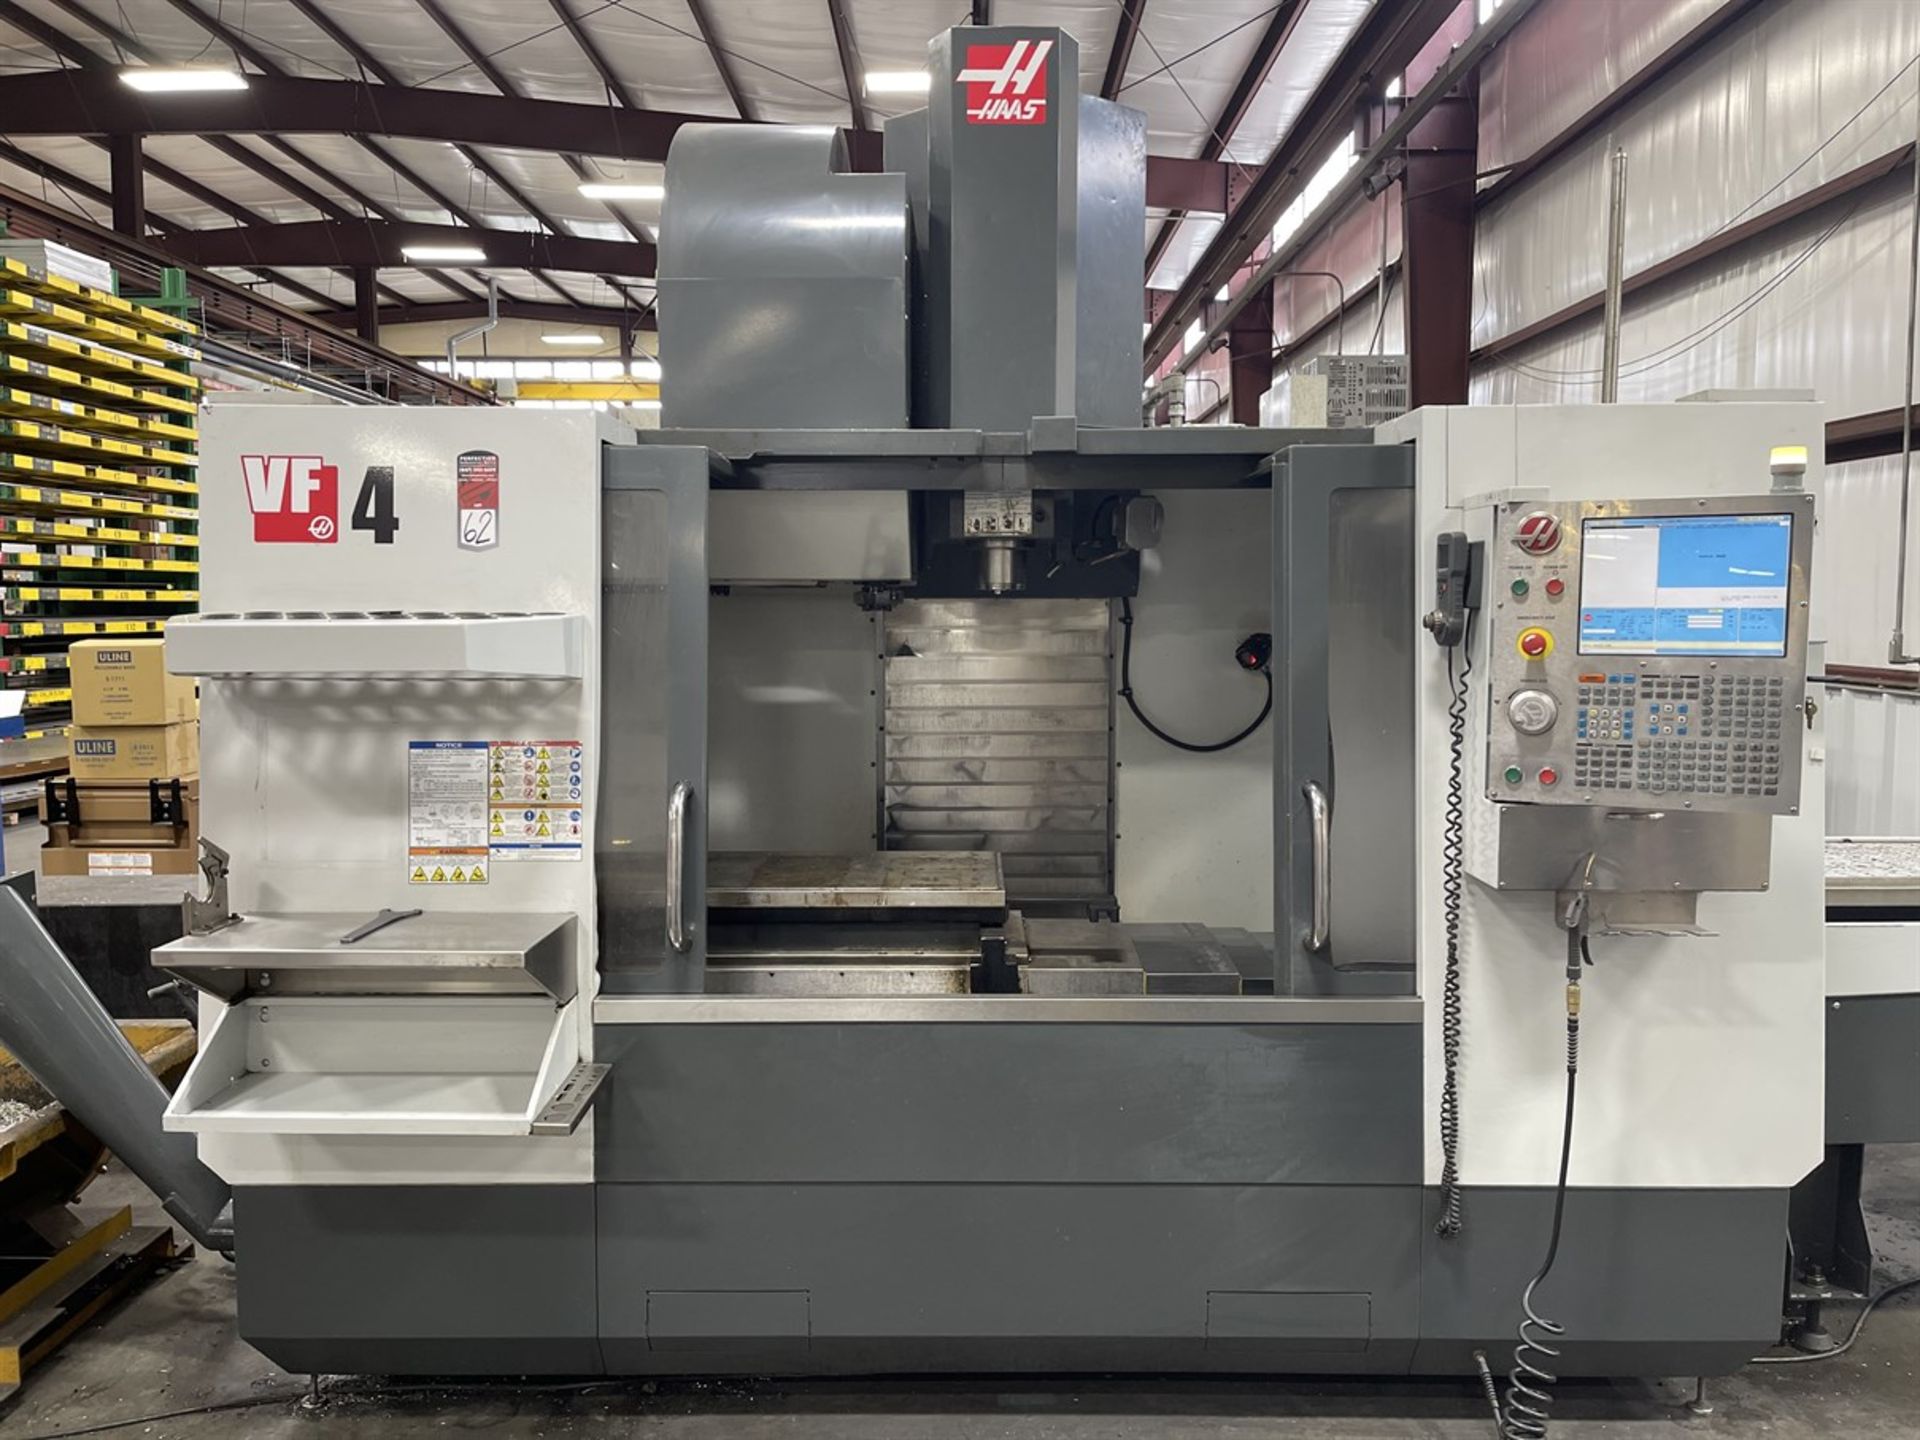 2010 HAAS VF-4APC 5 Axis Dual Pallet Vertical Machining Center, s/n 1080486, w/ HAAS Control, - Image 3 of 10